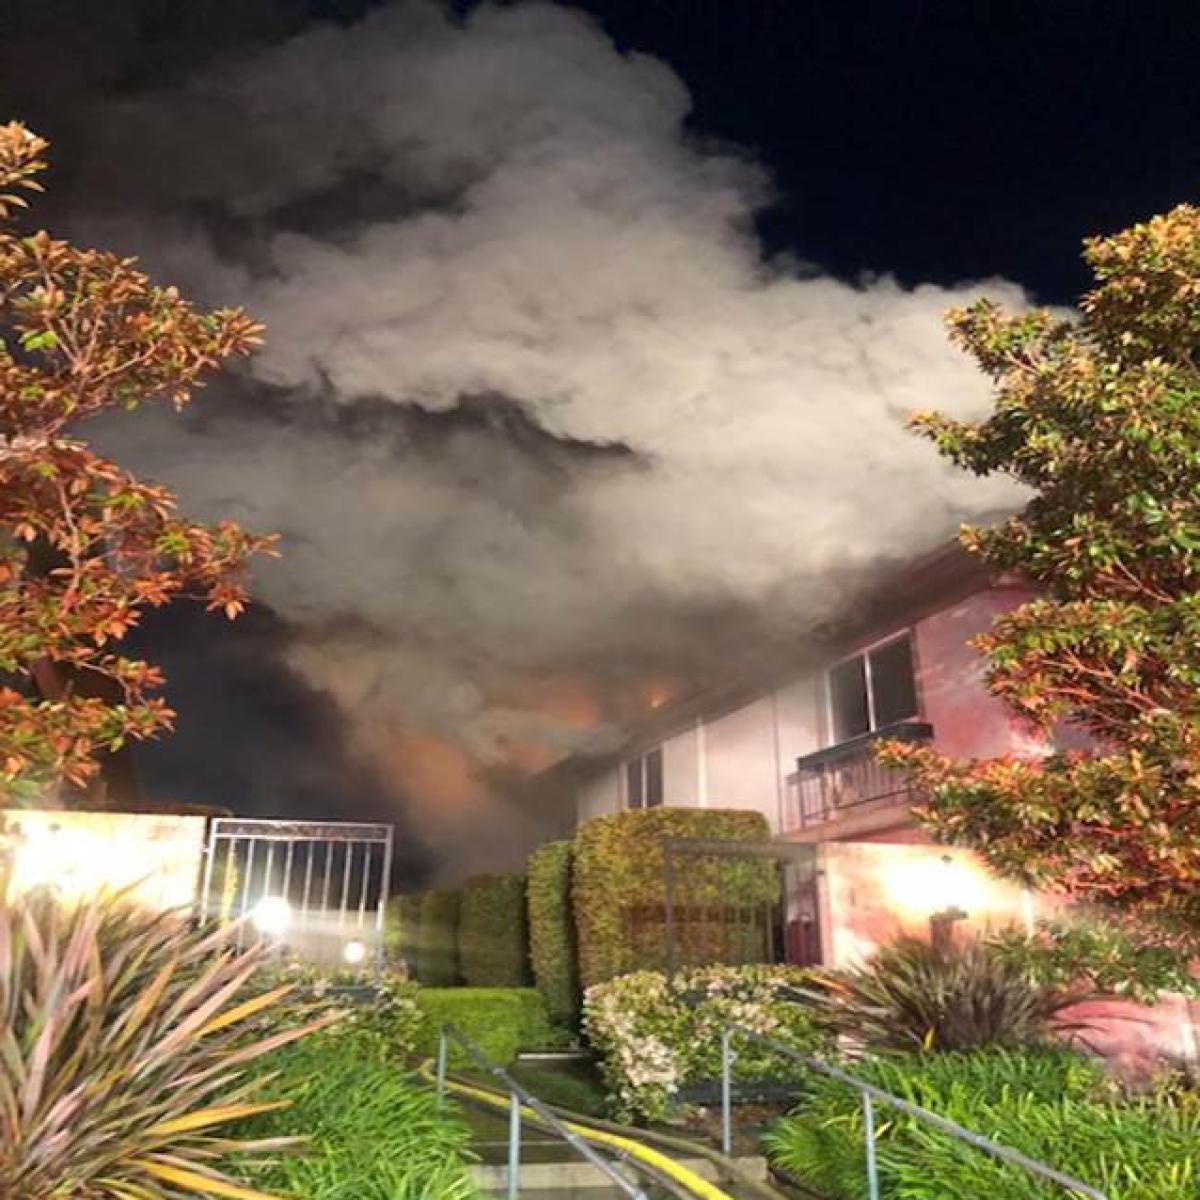 A residential structure fire occurred at 1061 Dover Drive on March 10. The fire was put out at around 1:14 a.m. on March 11.